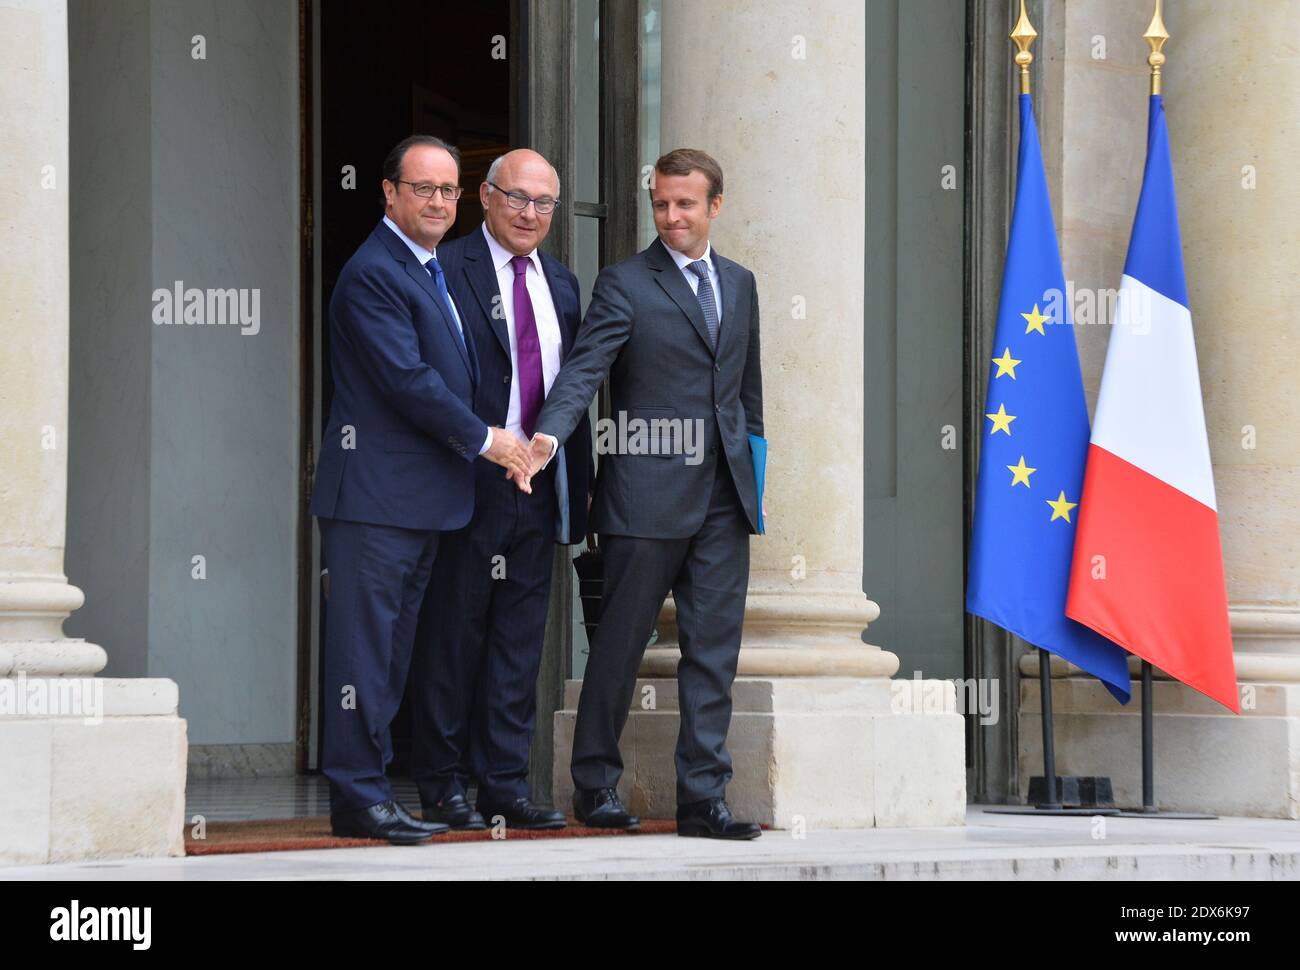 President Francois Hollande, French Finance Minister Michel Sapin and newly-appointed Economy Minister Emmanuel Macron leaving the Elysee presidential palace in Paris, France after a weekly cabinet meeting. French President Francois Hollande on August 27 installed a former banker and ally as economy minister in an emergency reshuffle seen as the 'last chance' to haul France out of the biggest crisis of his presidency. Hollande caught everyone off guard with the appointment of Emmanuel Macron, a 36-year-old ex-Rothschild banker and architect of the president's economic policy. Photo by Christia Stock Photo